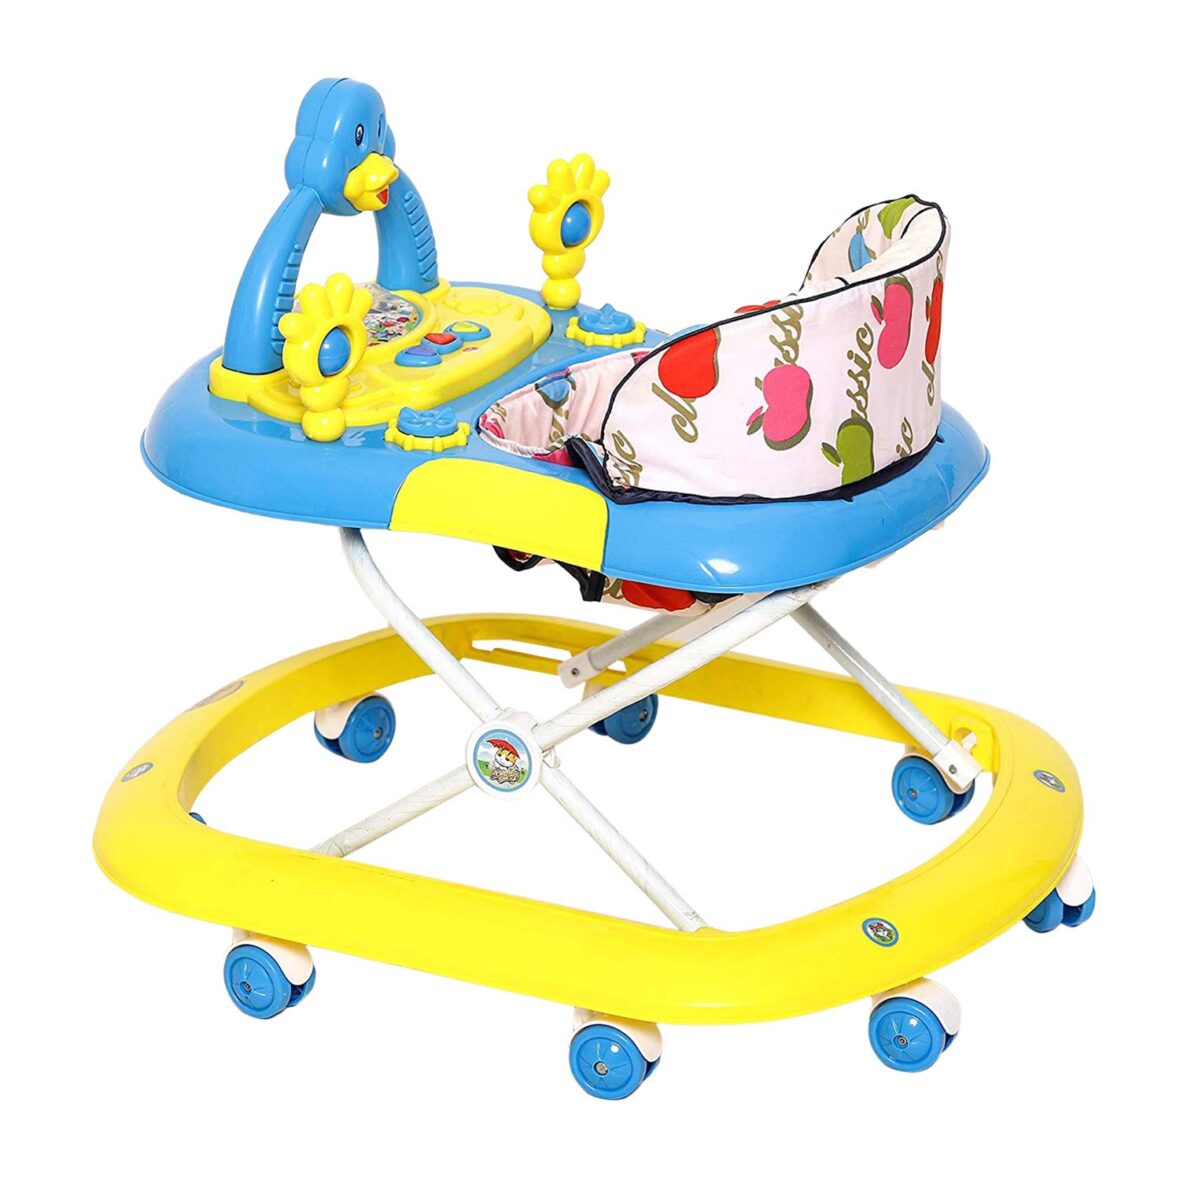 Dash Dora Deluxe Musical Baby Walker with Toy Bar, Cushioned Seat, Adjustable Height and 360 Degree Swivel Wheels for 6-12 Months Baby boy and Baby Girl (Blue)